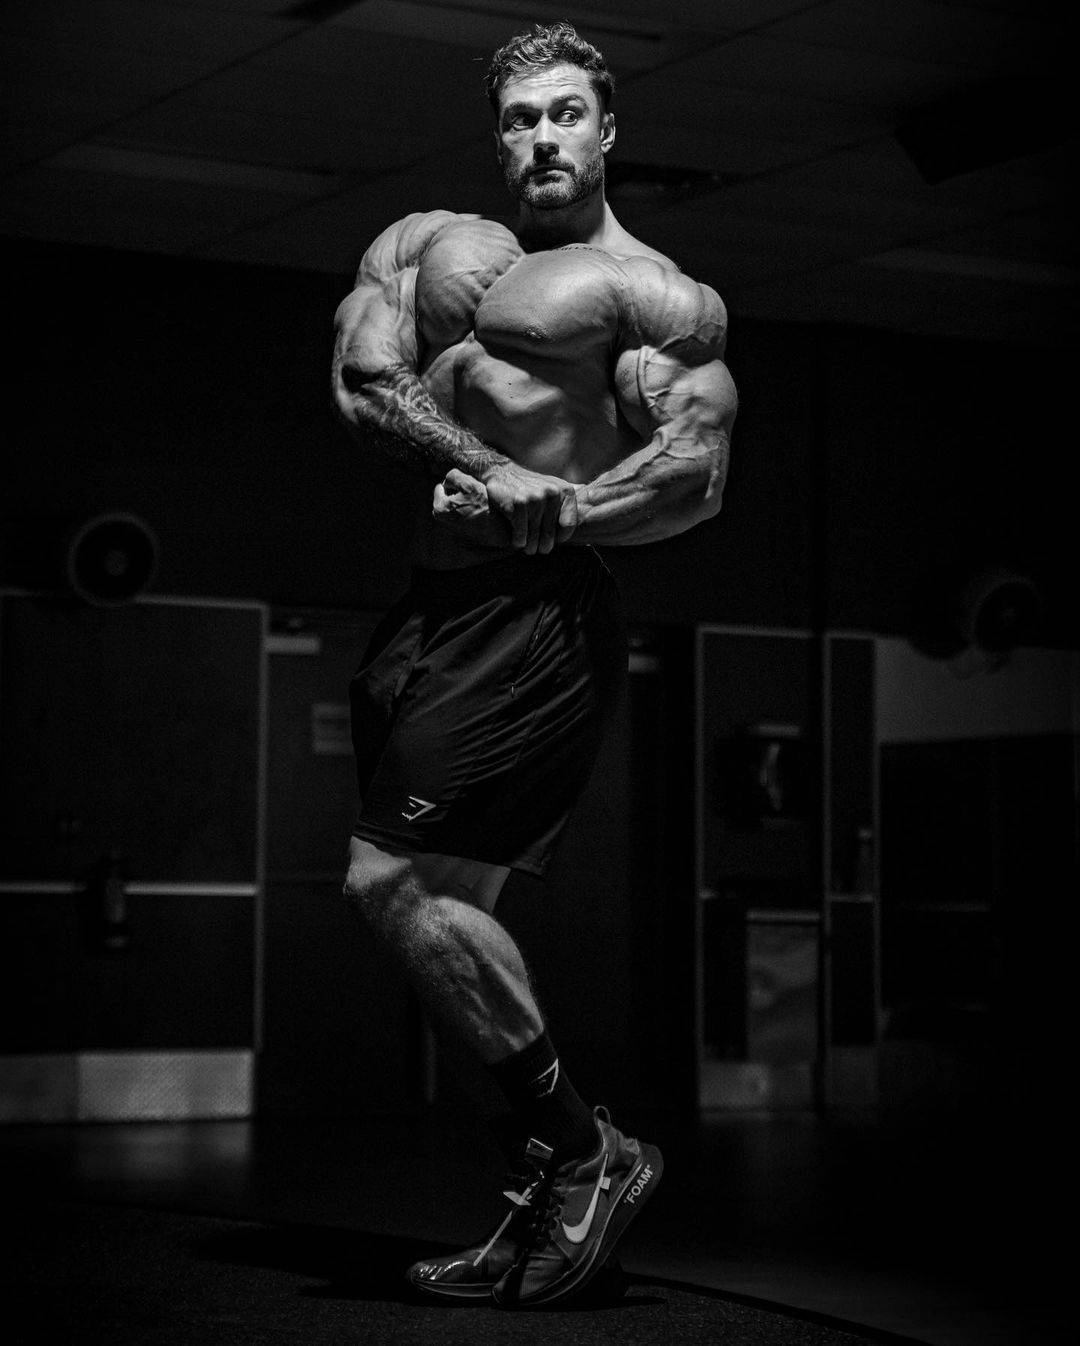 Chris Bumstead Med Side Bryst Pose Wallpaper